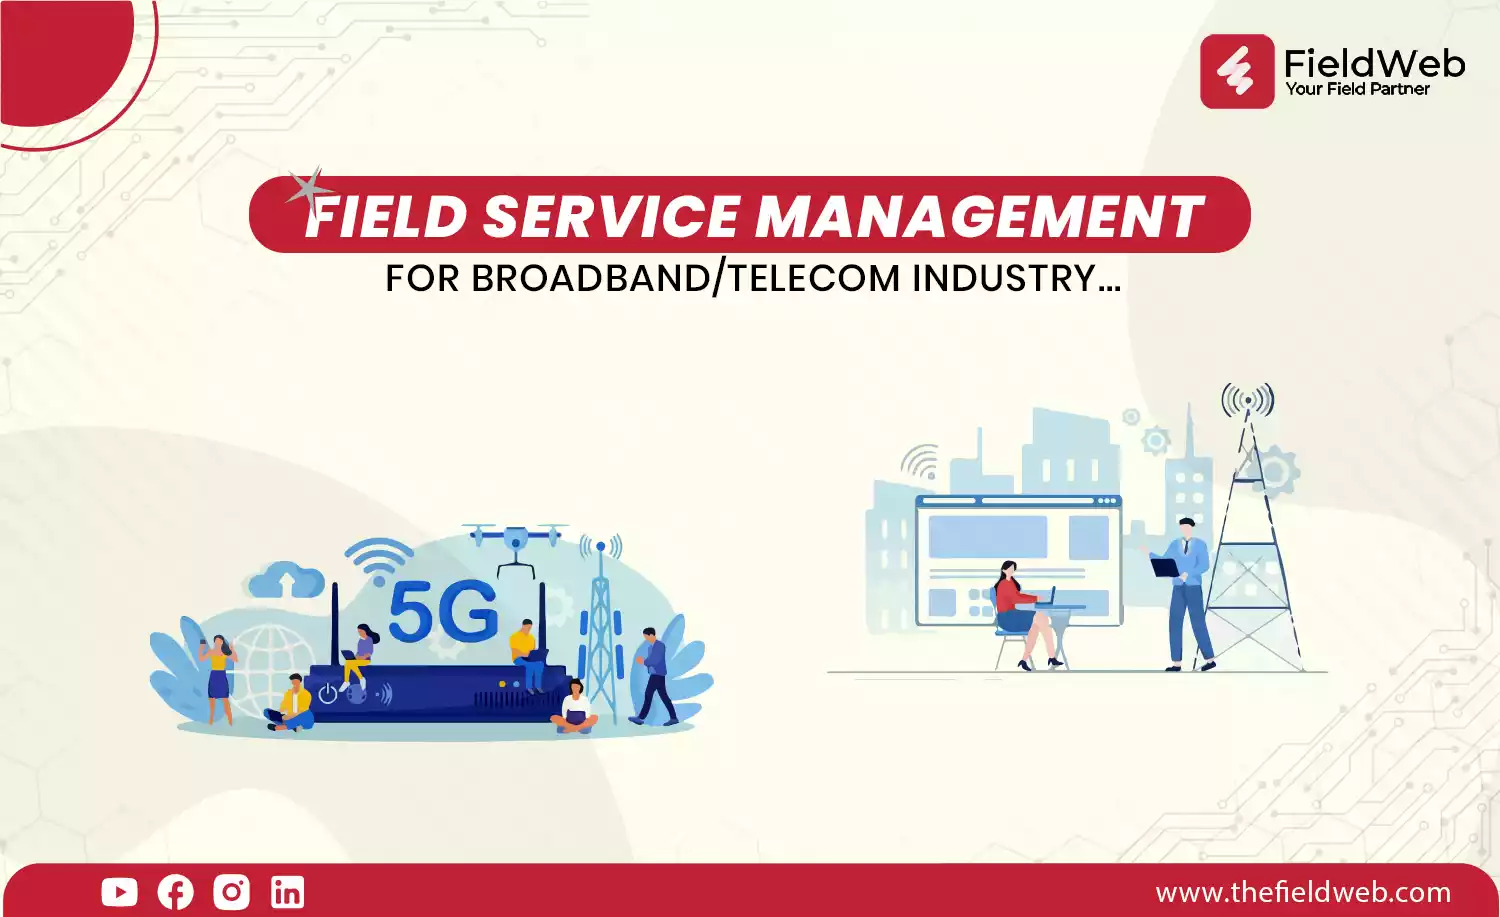 Field service management Software for Broadband Industry